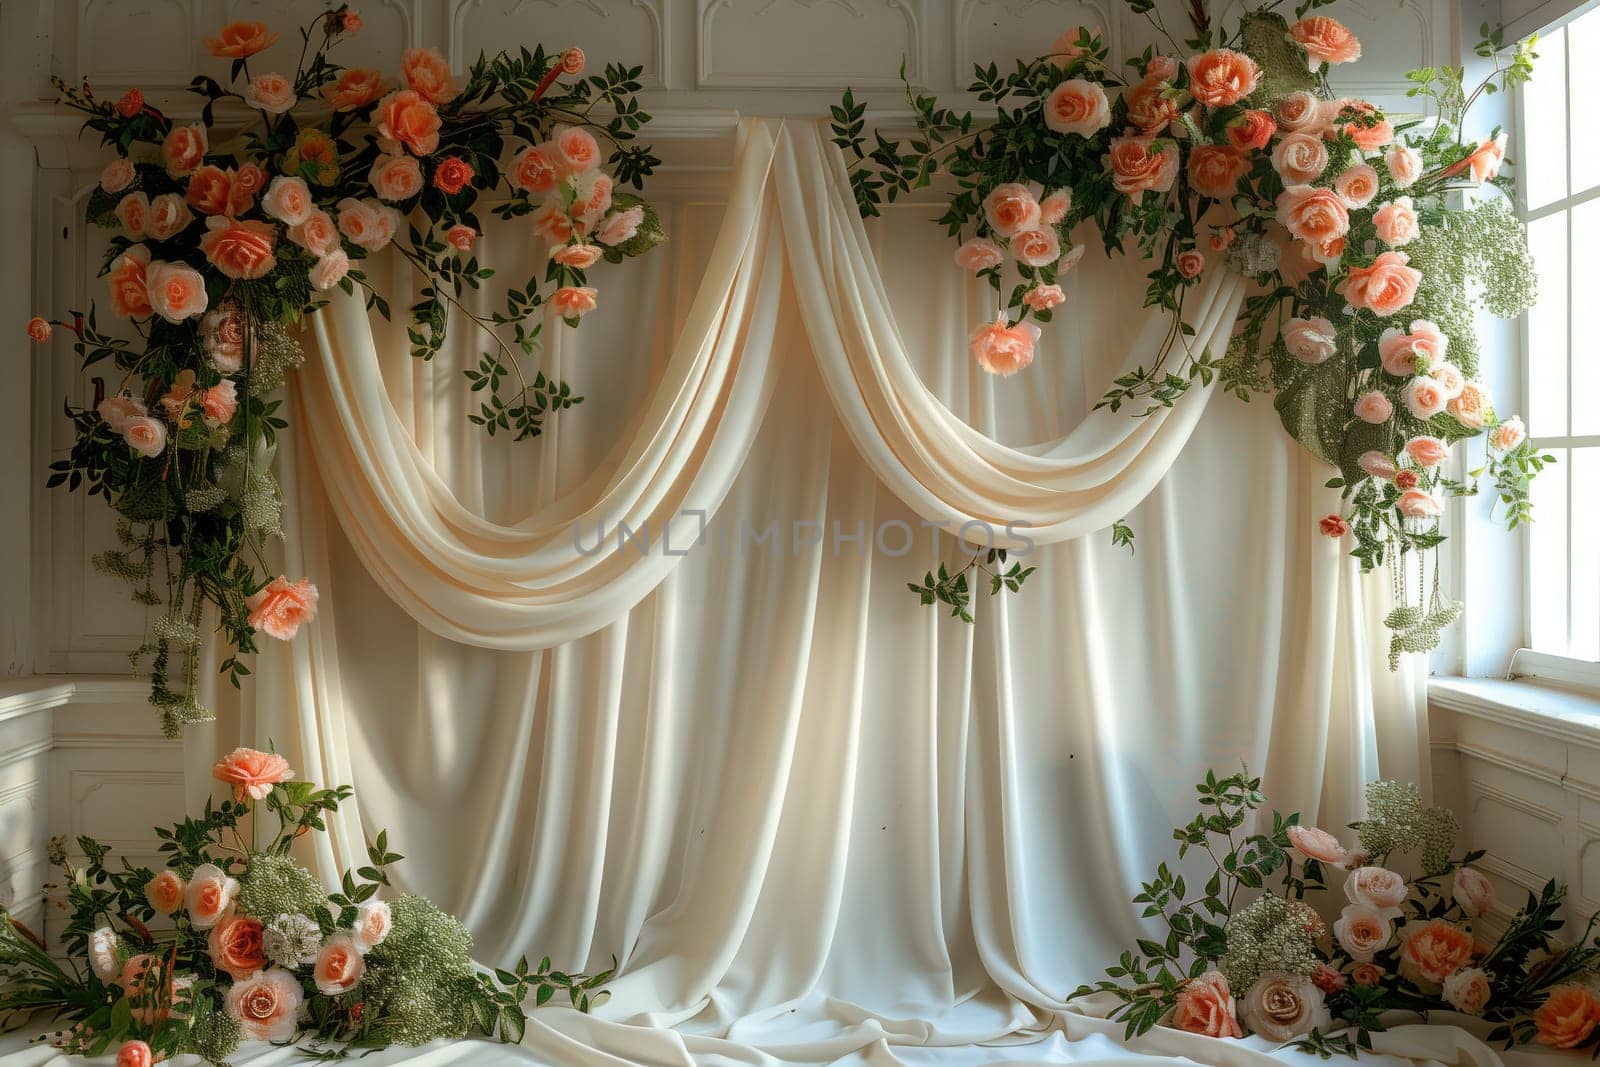 White curtains and flowers add elegance to the rooms interior design by richwolf